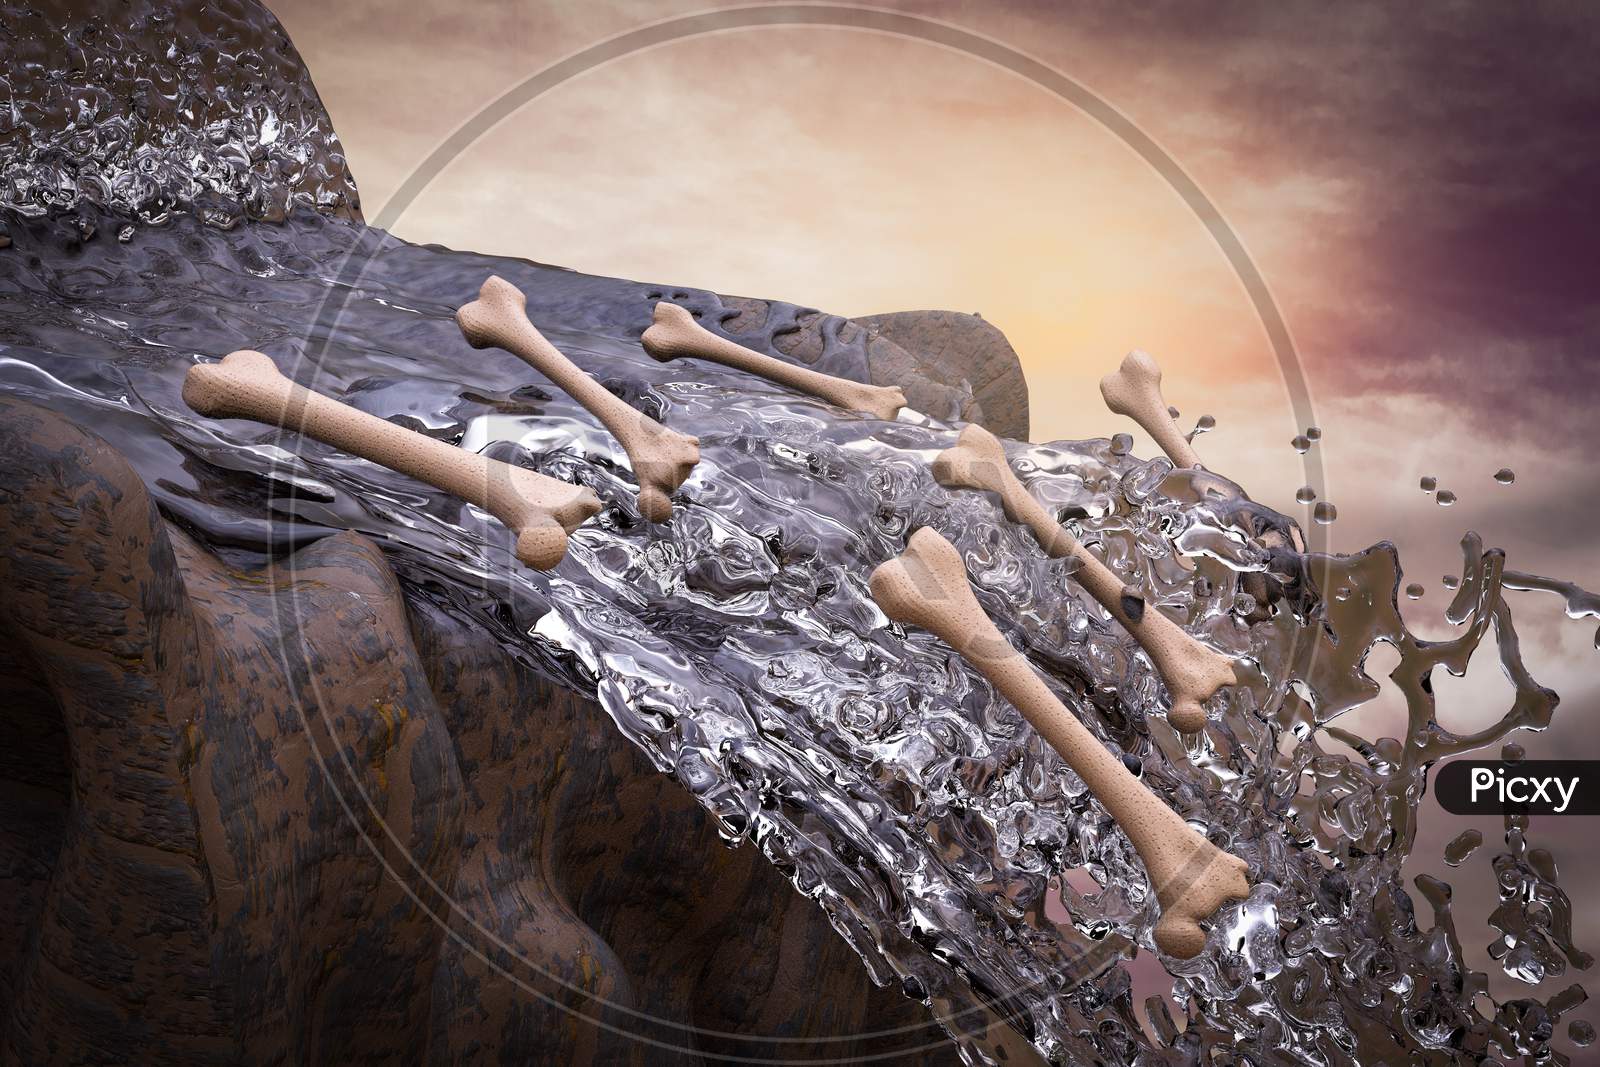 Human Thigh Bones Fall From A Waterfall At Sunset Magenta Day Demonstrating Osteoporosis Failure Concept. 3D Illustration